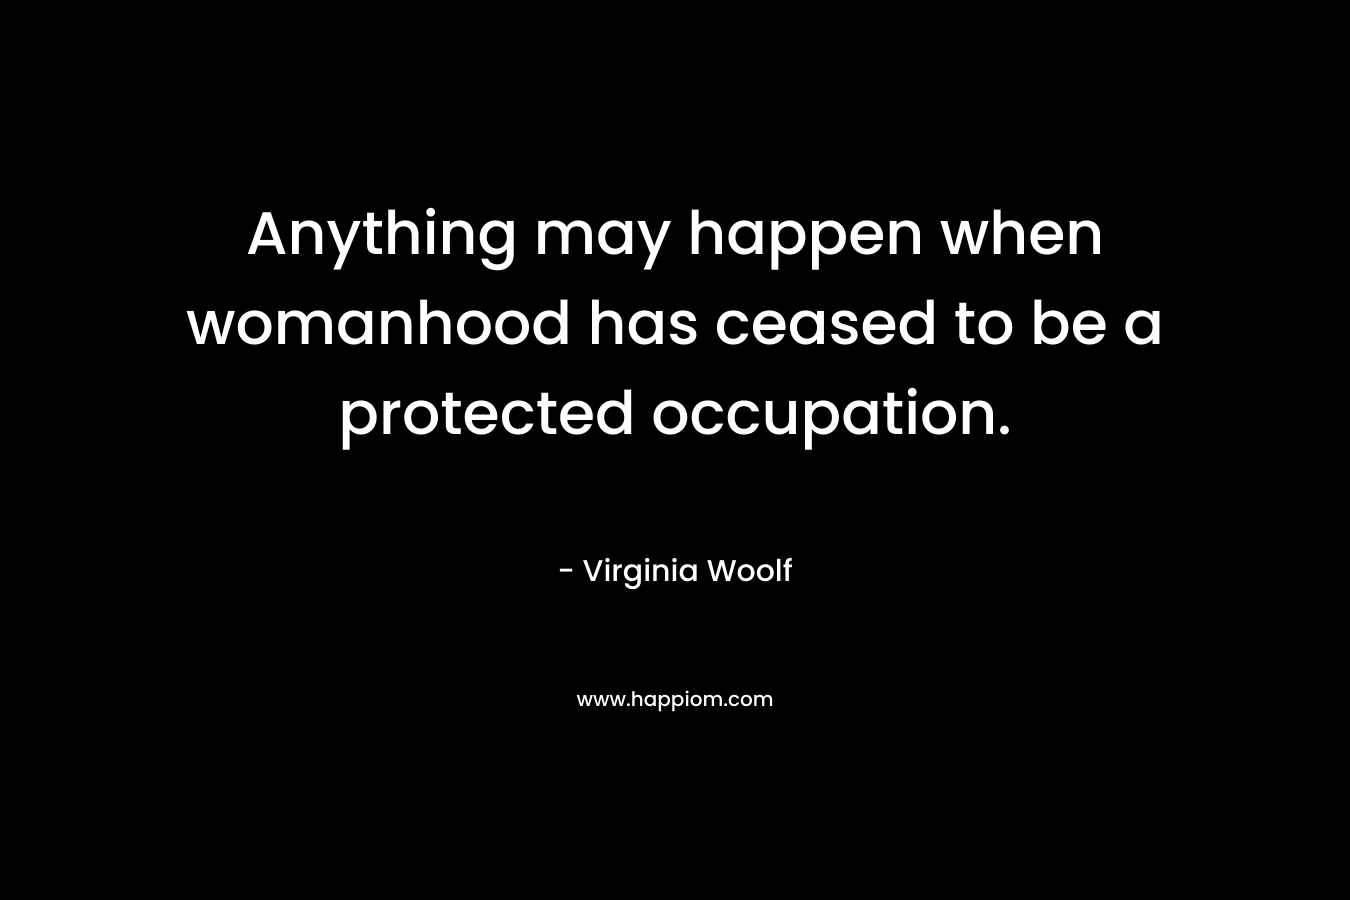 Anything may happen when womanhood has ceased to be a protected occupation.